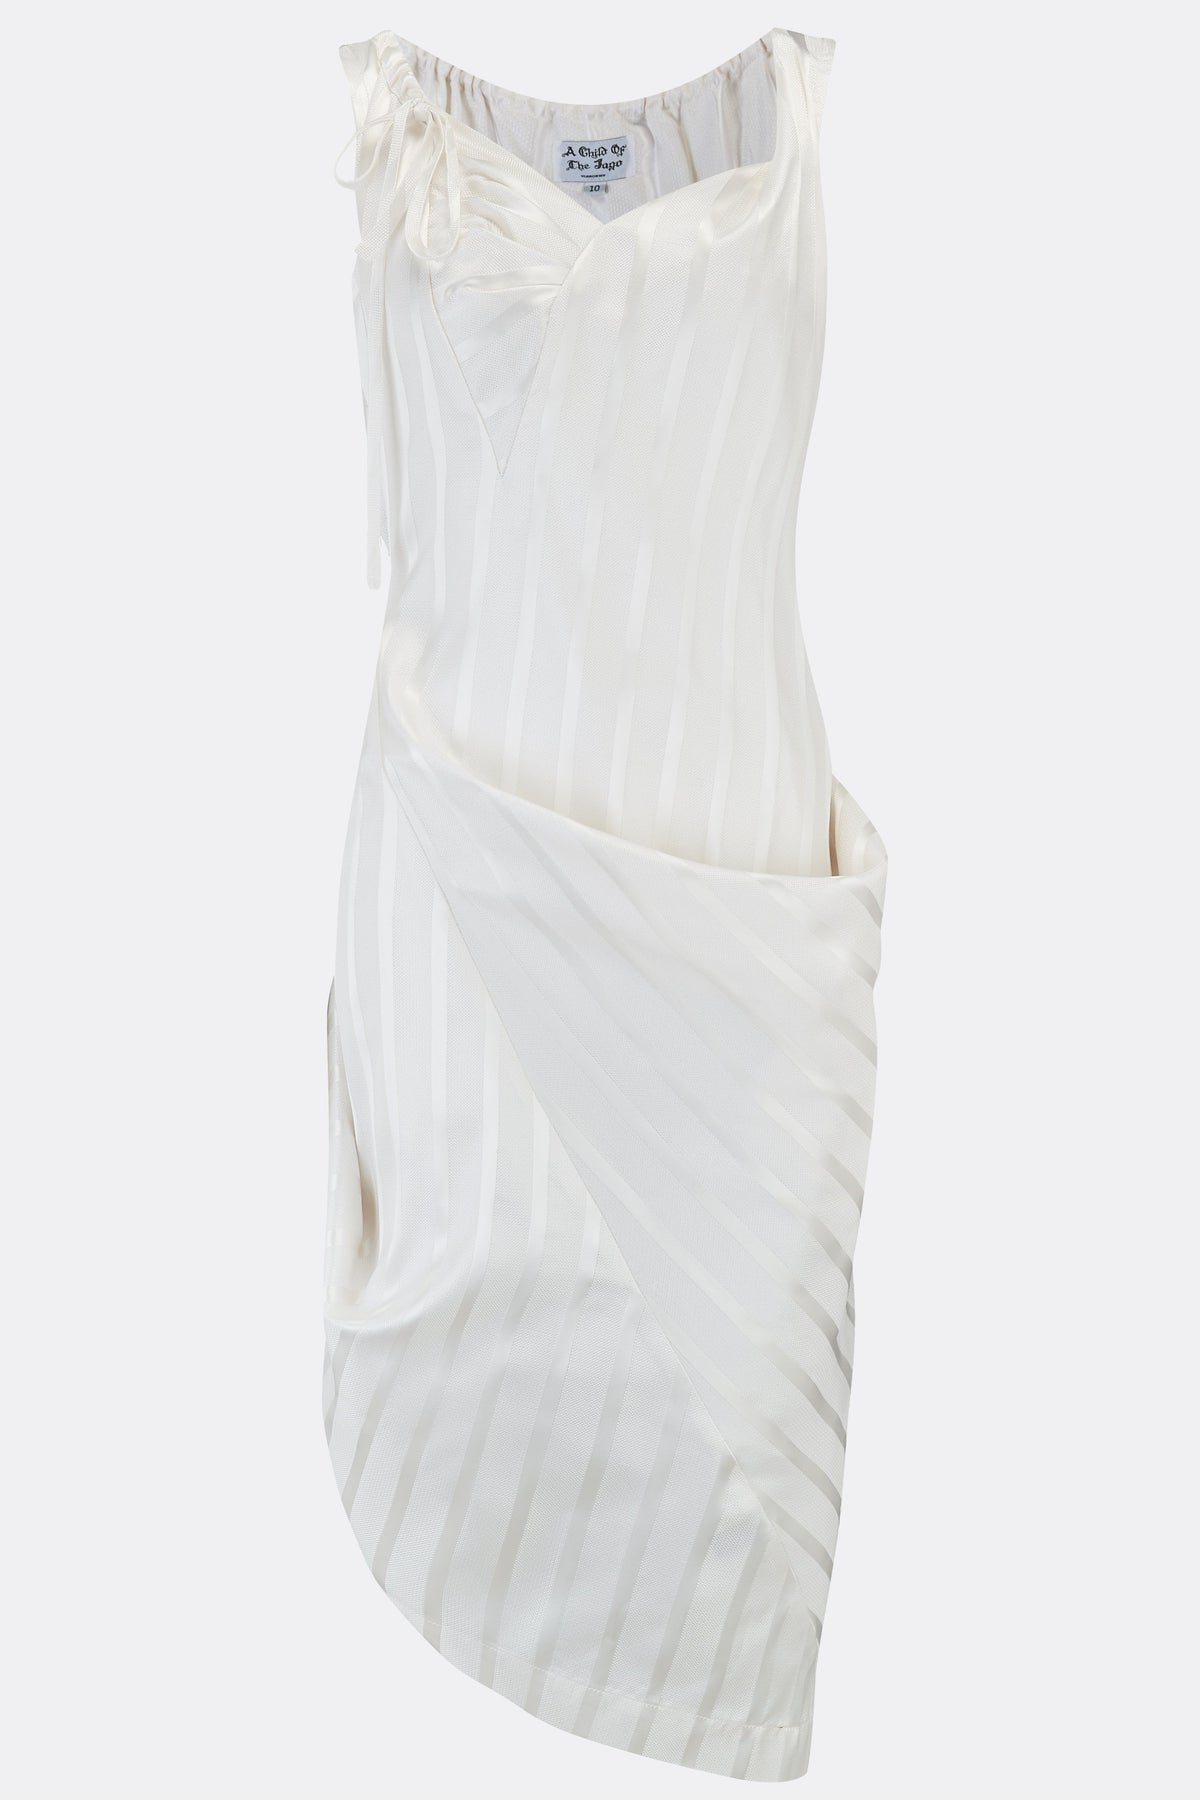 ROCHESTER SWAG DRESS WHITE- made to order-womenswear-A Child Of The Jago